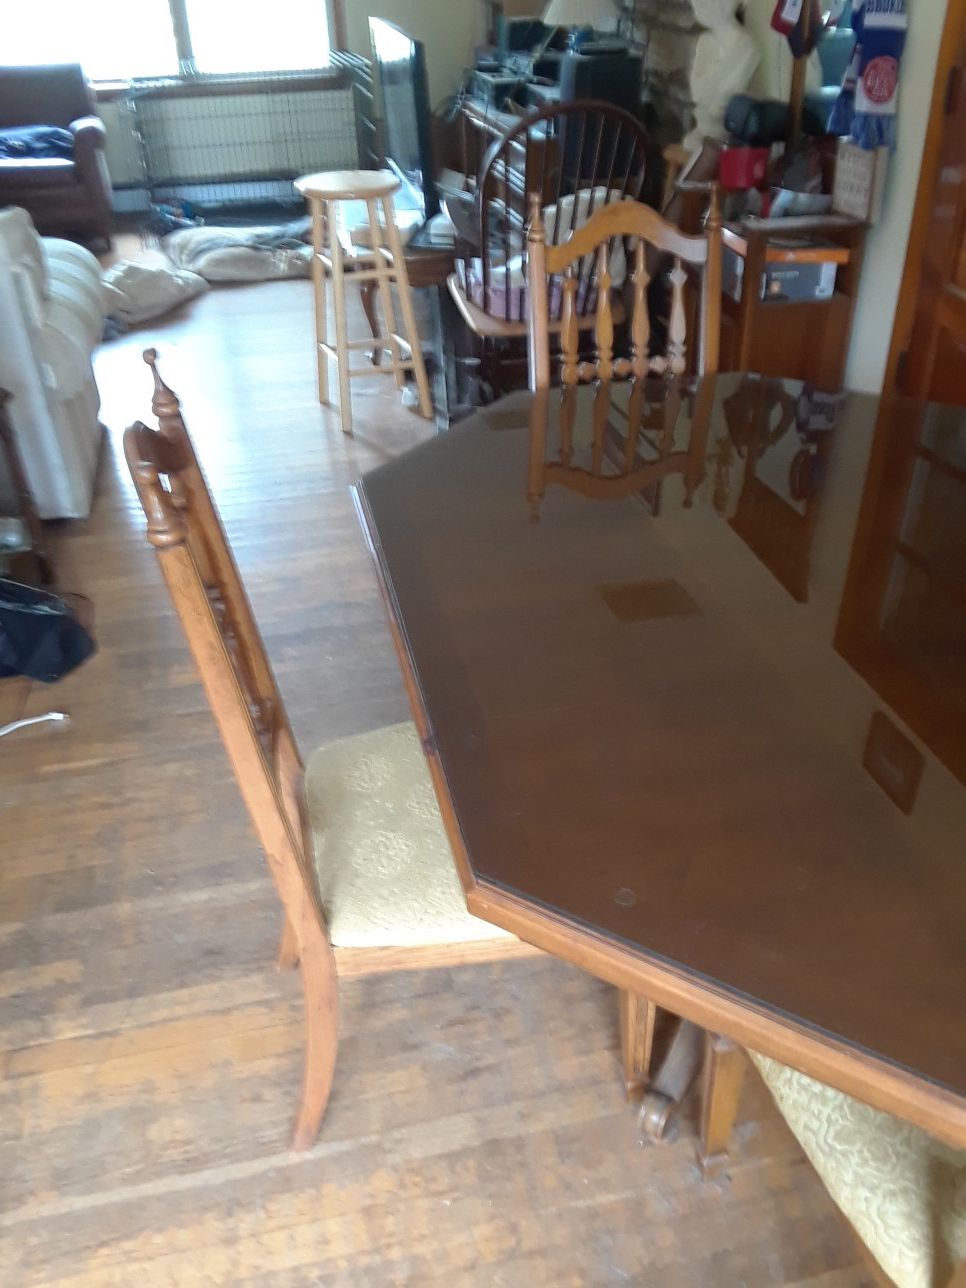 Very nice antique table and chairs